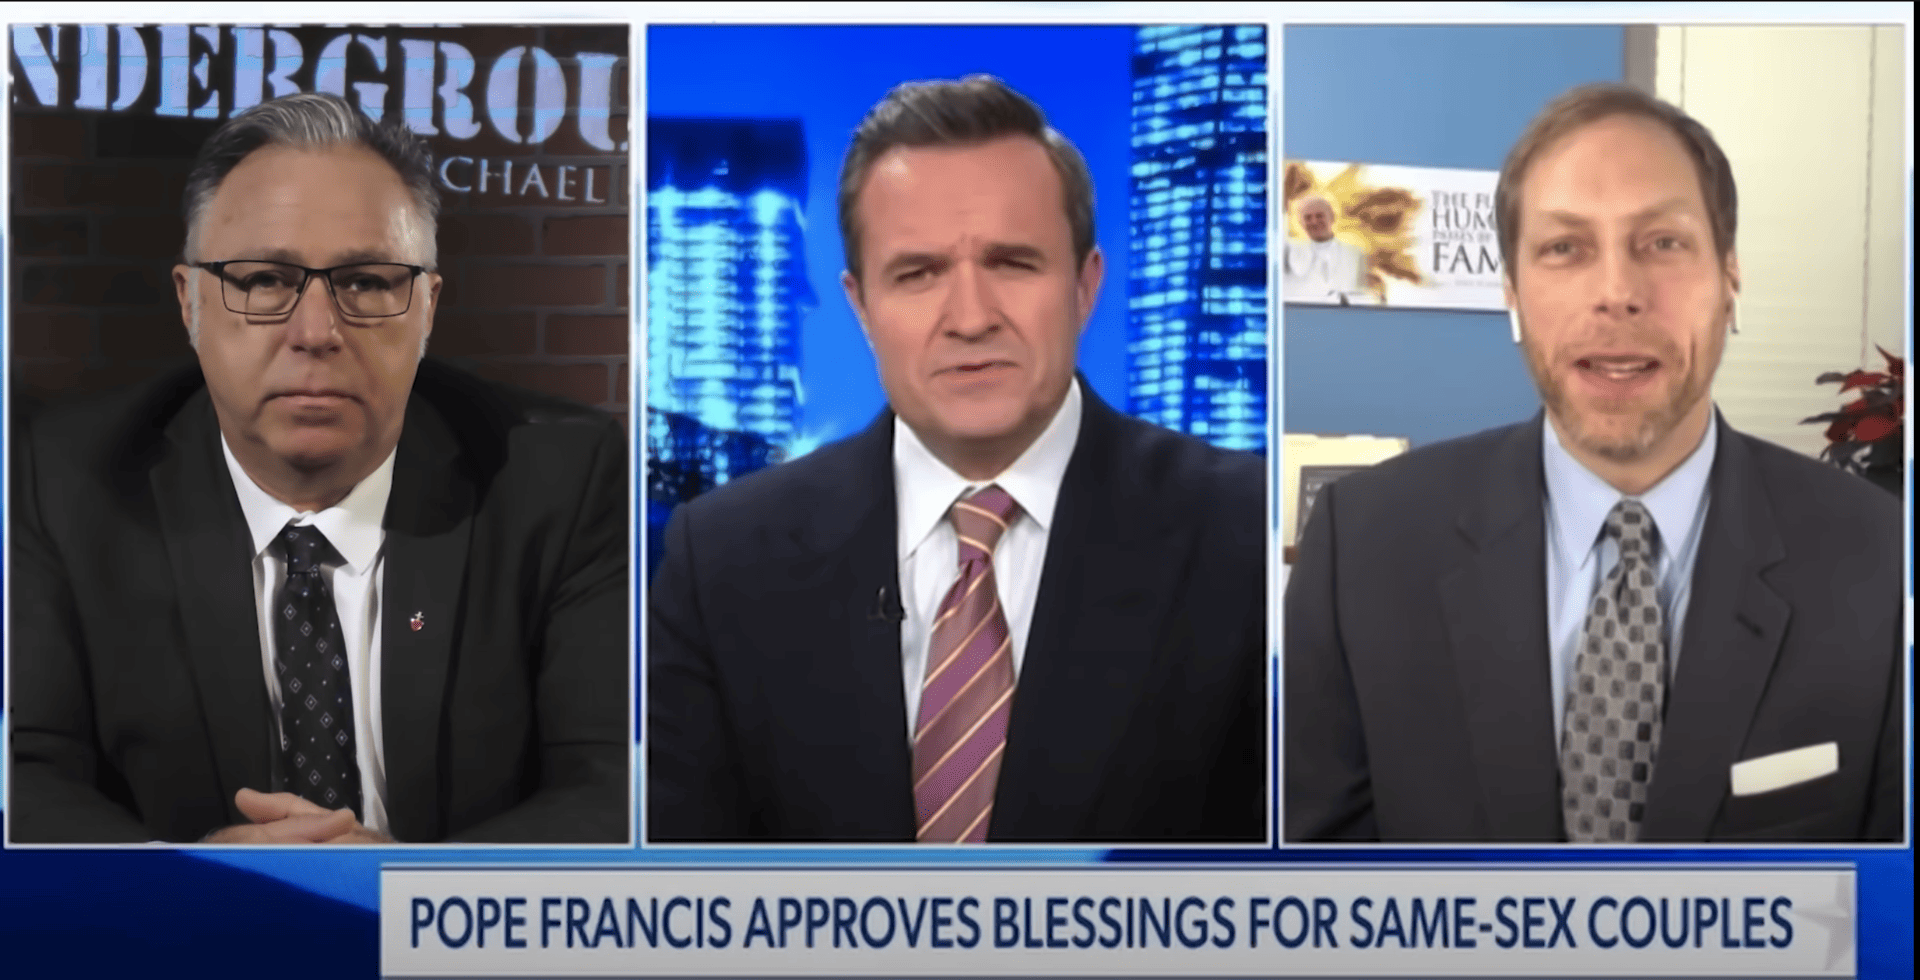 Newsmax: Pope Francis approves same-sex blessings